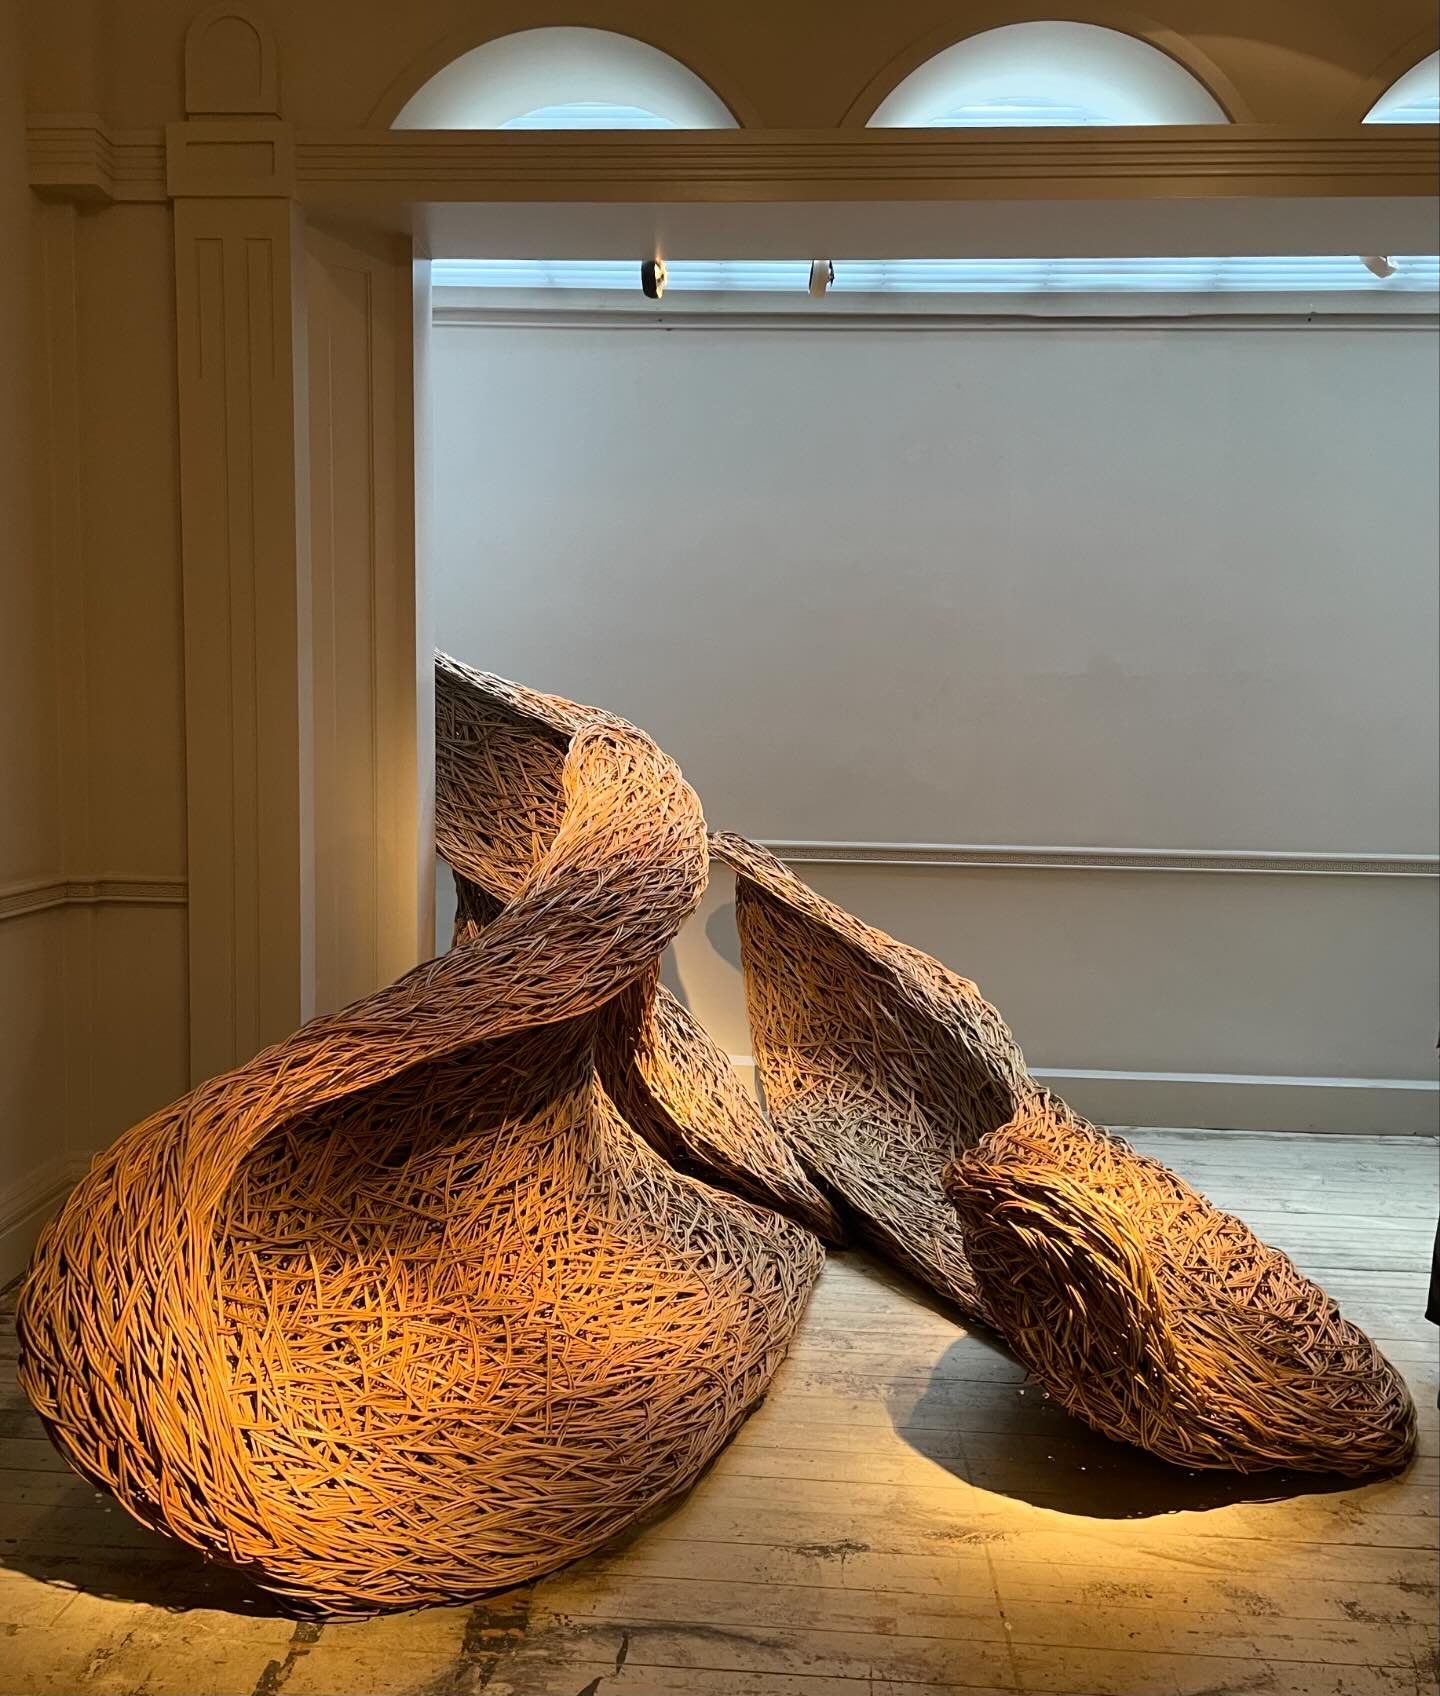 Congratulations to lovely @lauraellenbacon on a stunning solo show @hignellgallery 

I marvel at the complexity with which she tames, predominantly, Willow into such beautiful, flowing, organic forms.

If you get the chance do call in. The gallery&rs